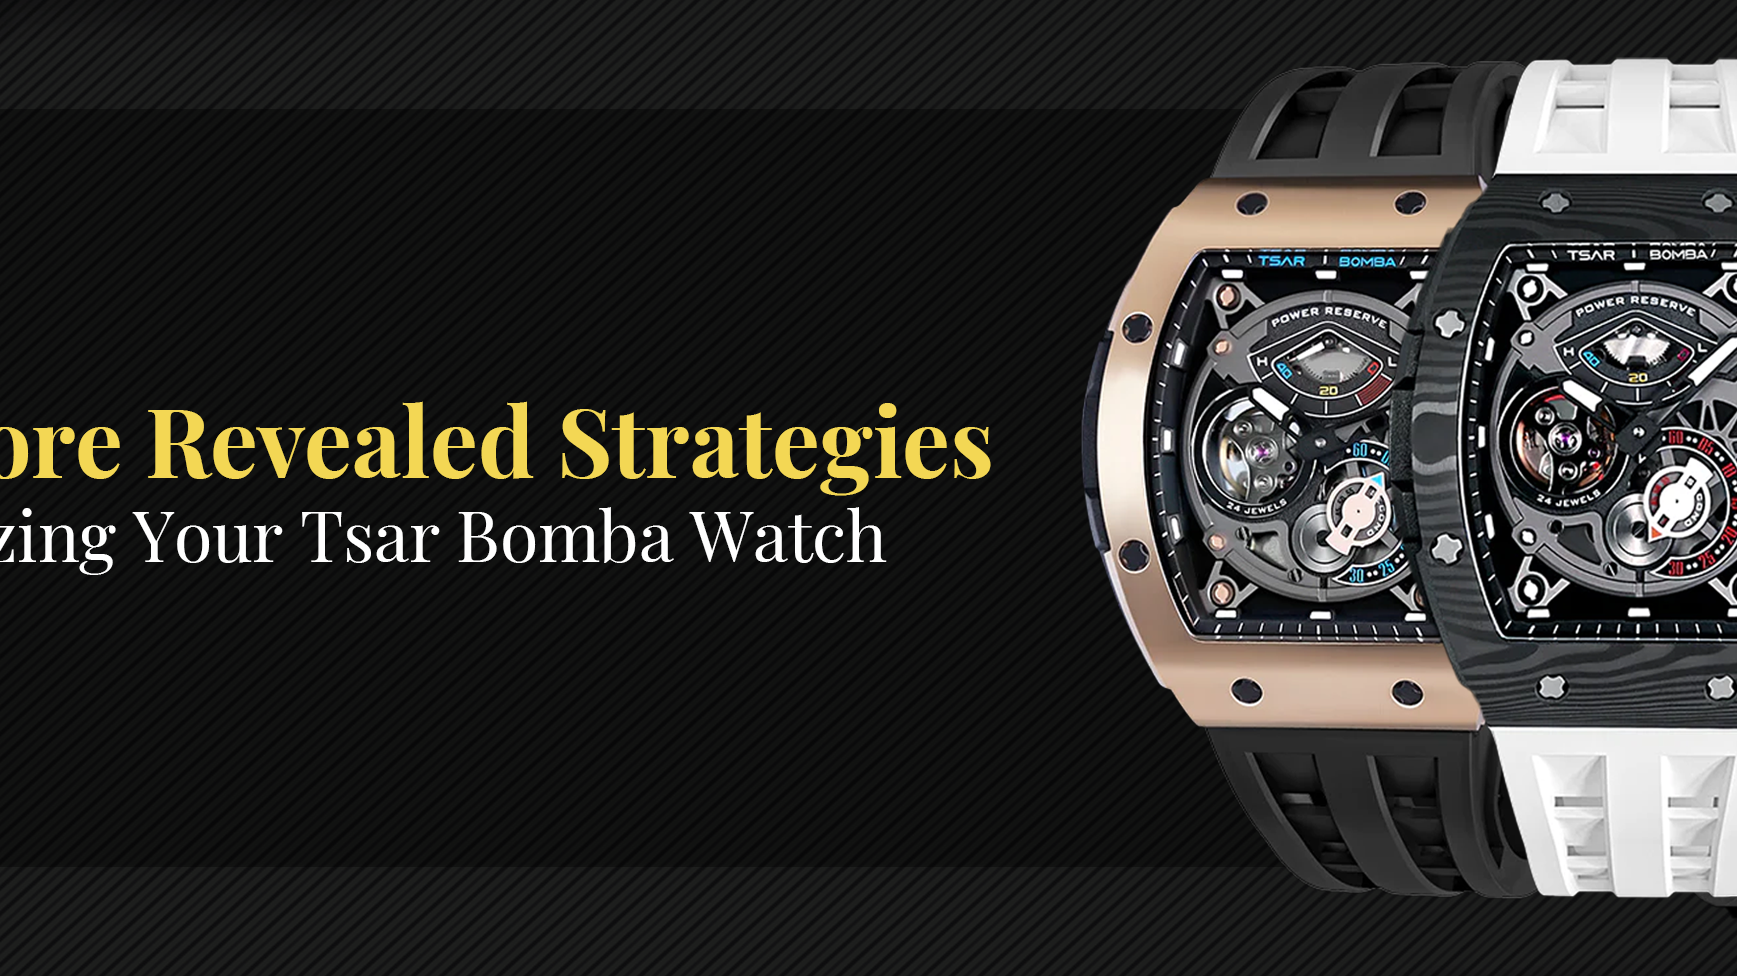 Never Before Revealed Strategies For Accessorizing Your Tsar Bomba Watch